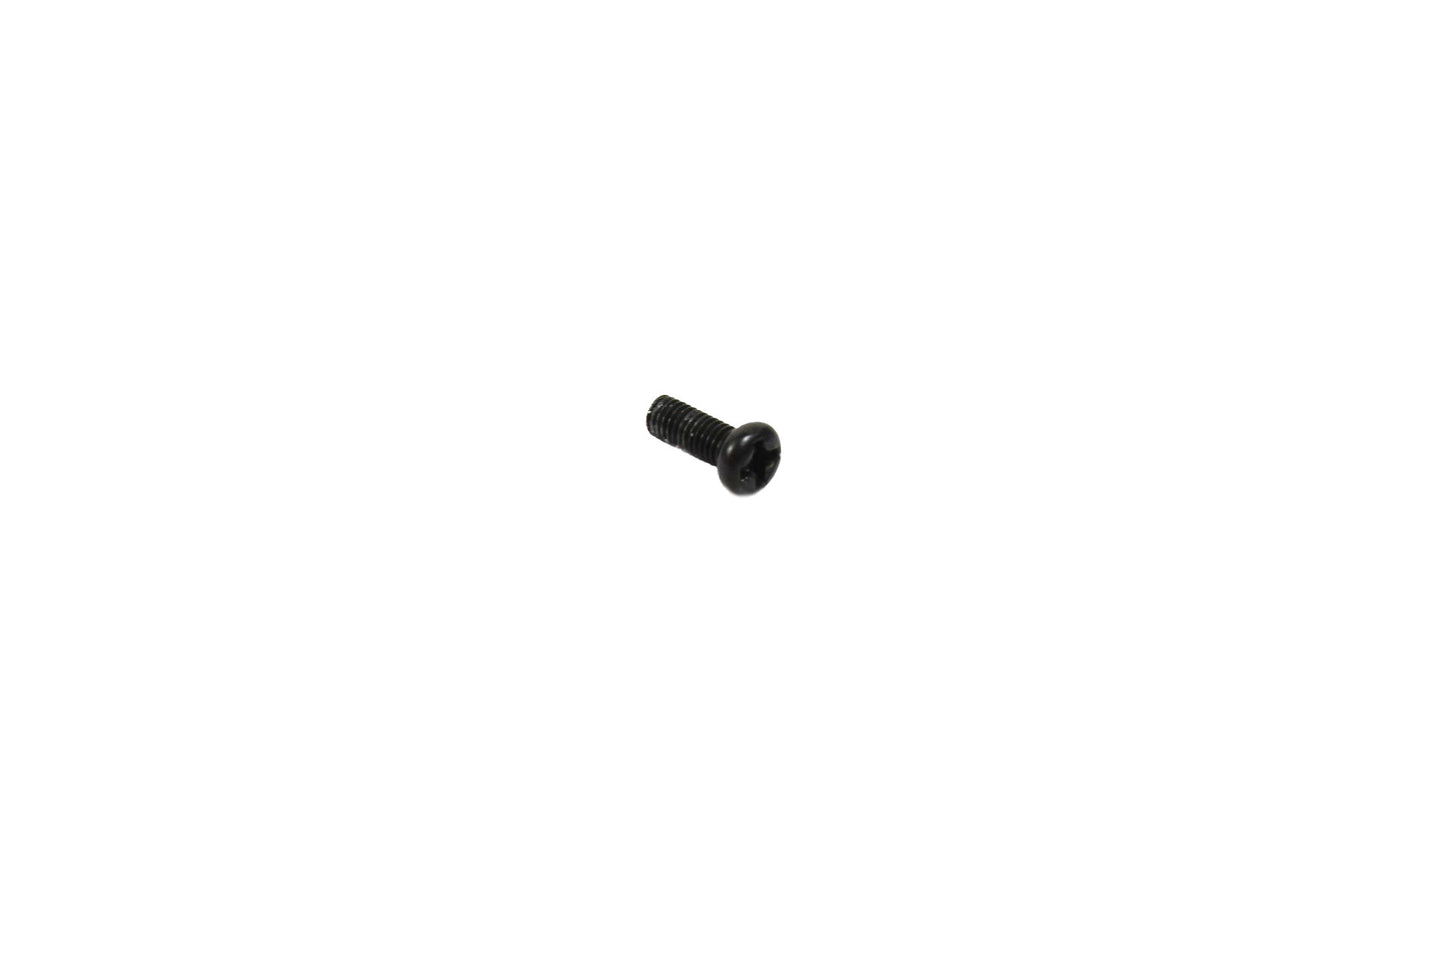 Set of 2 Airsoft Rifle Grip Connection Screws